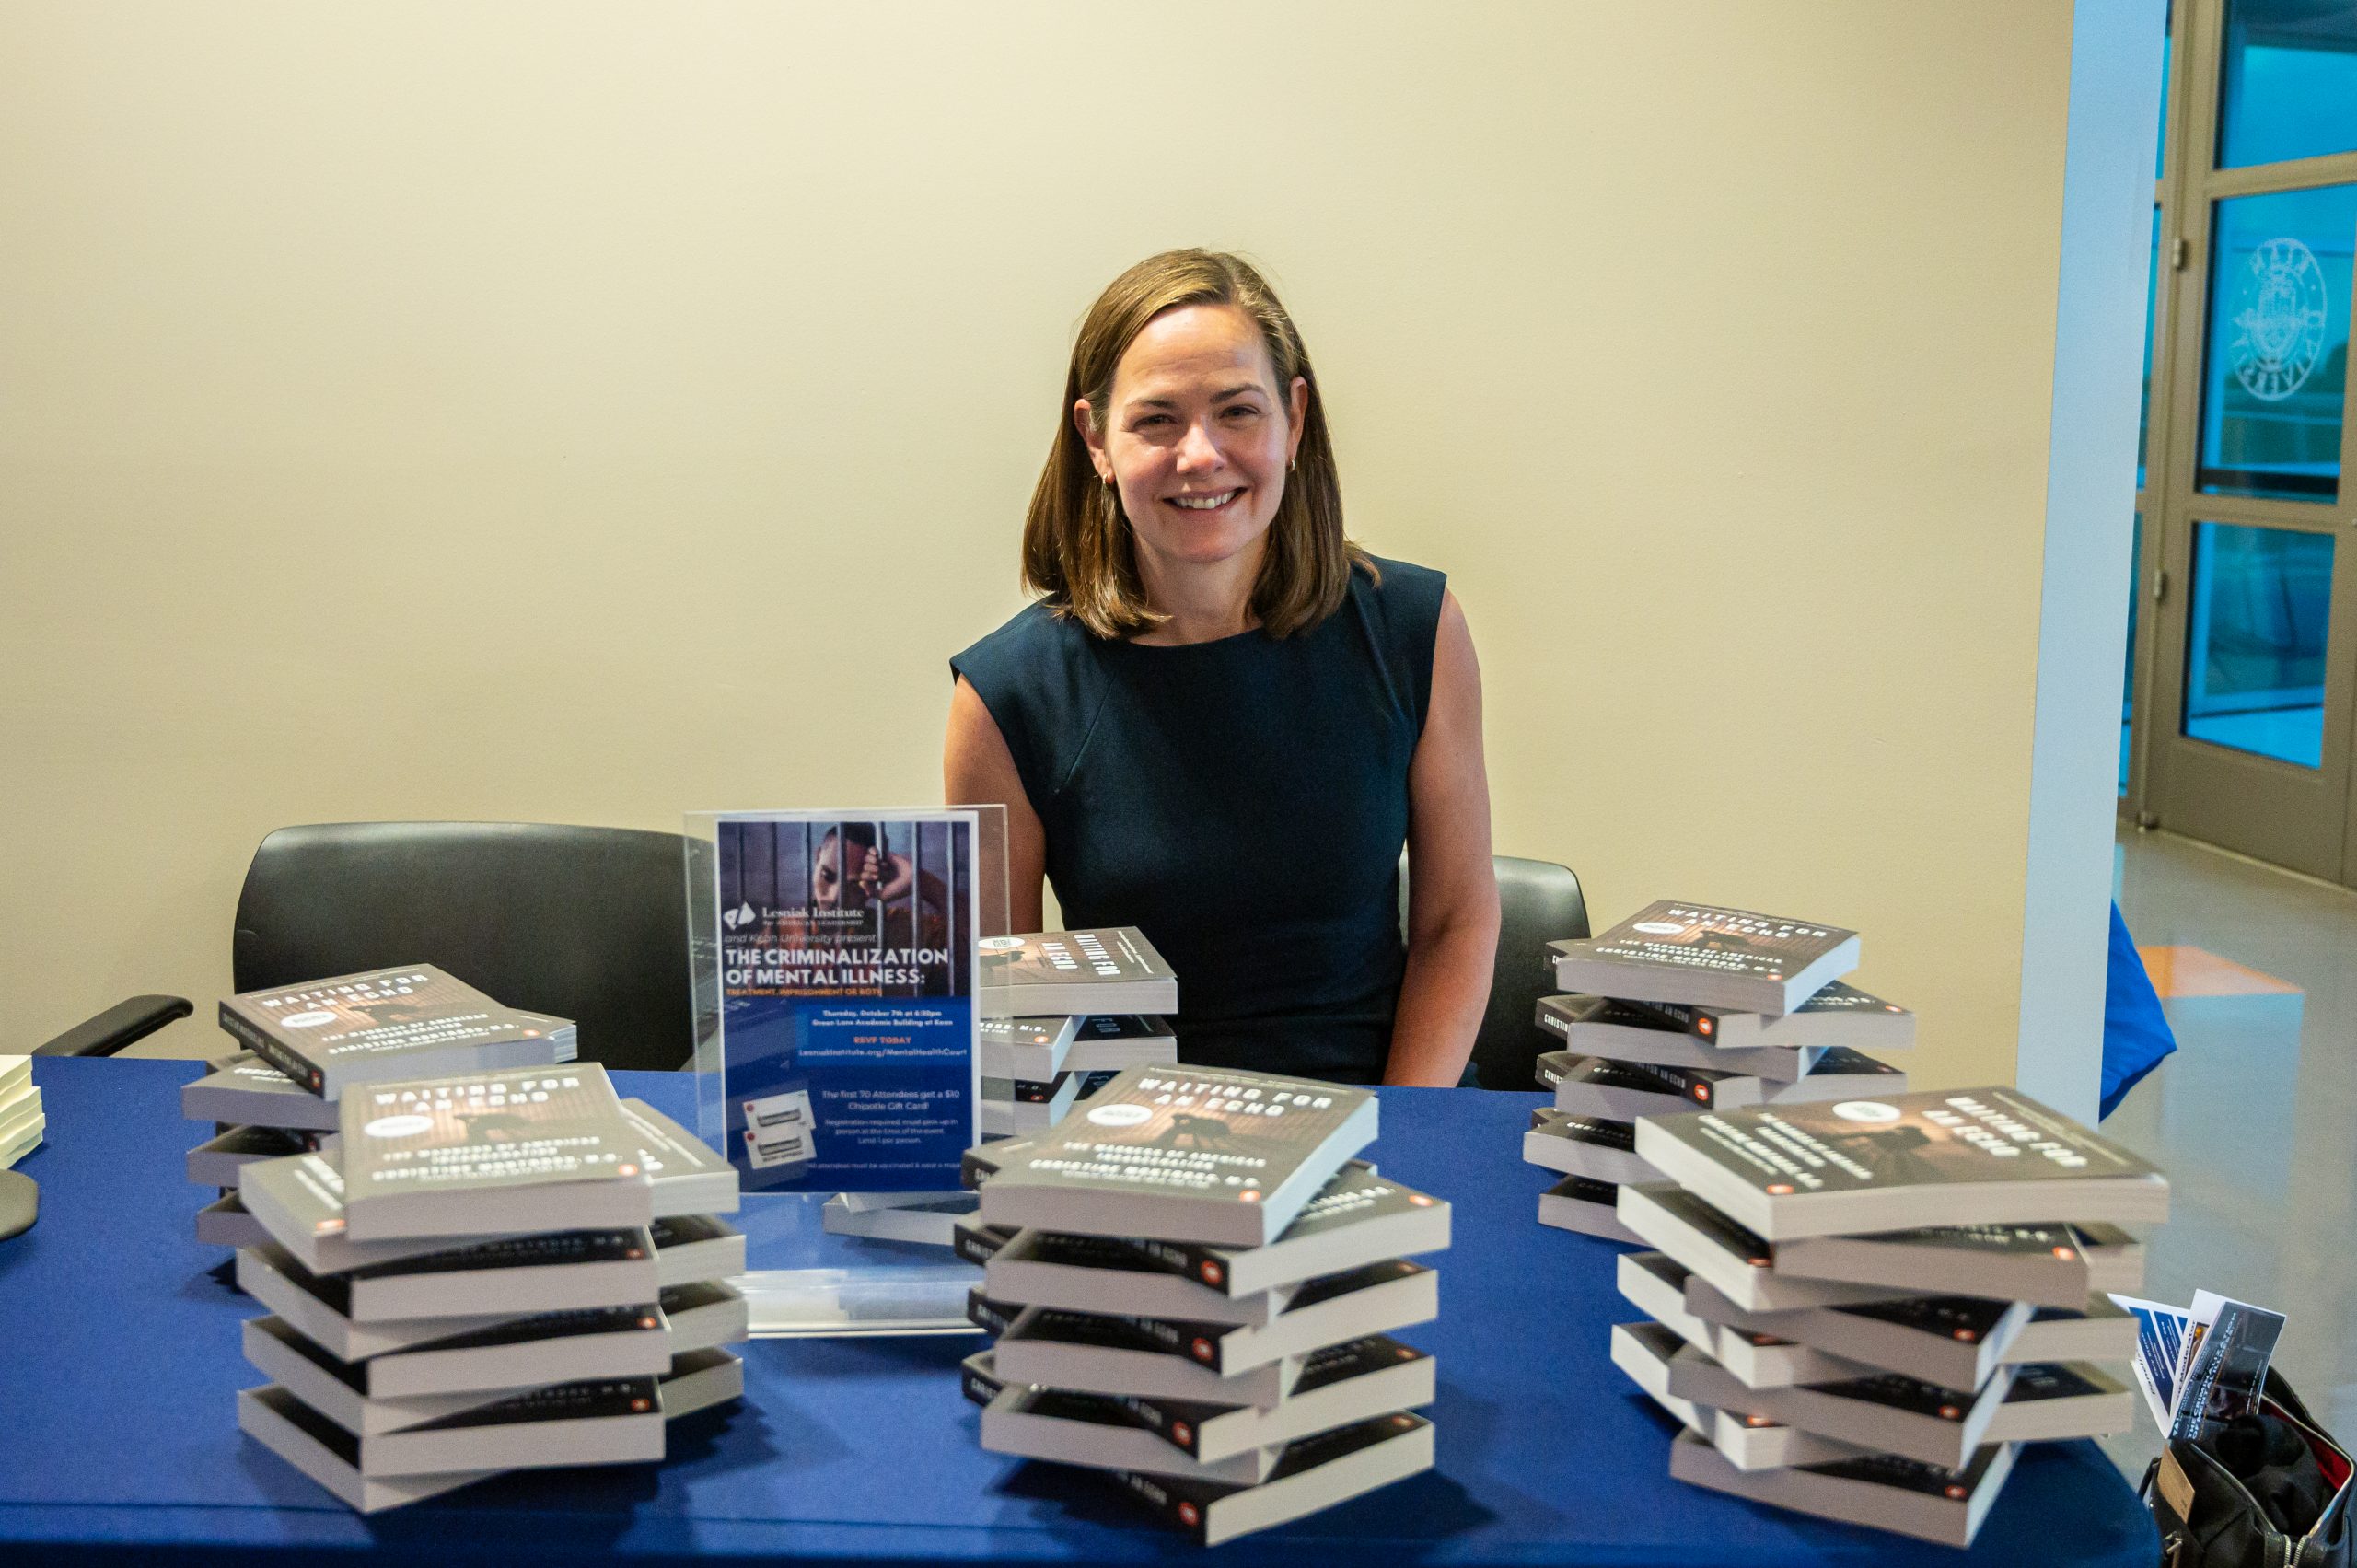 Dr Christine Montross, author of Waiting for an Echo, signs books at Kean University and the Lesniak Institute's Criminalization of Mental Illness